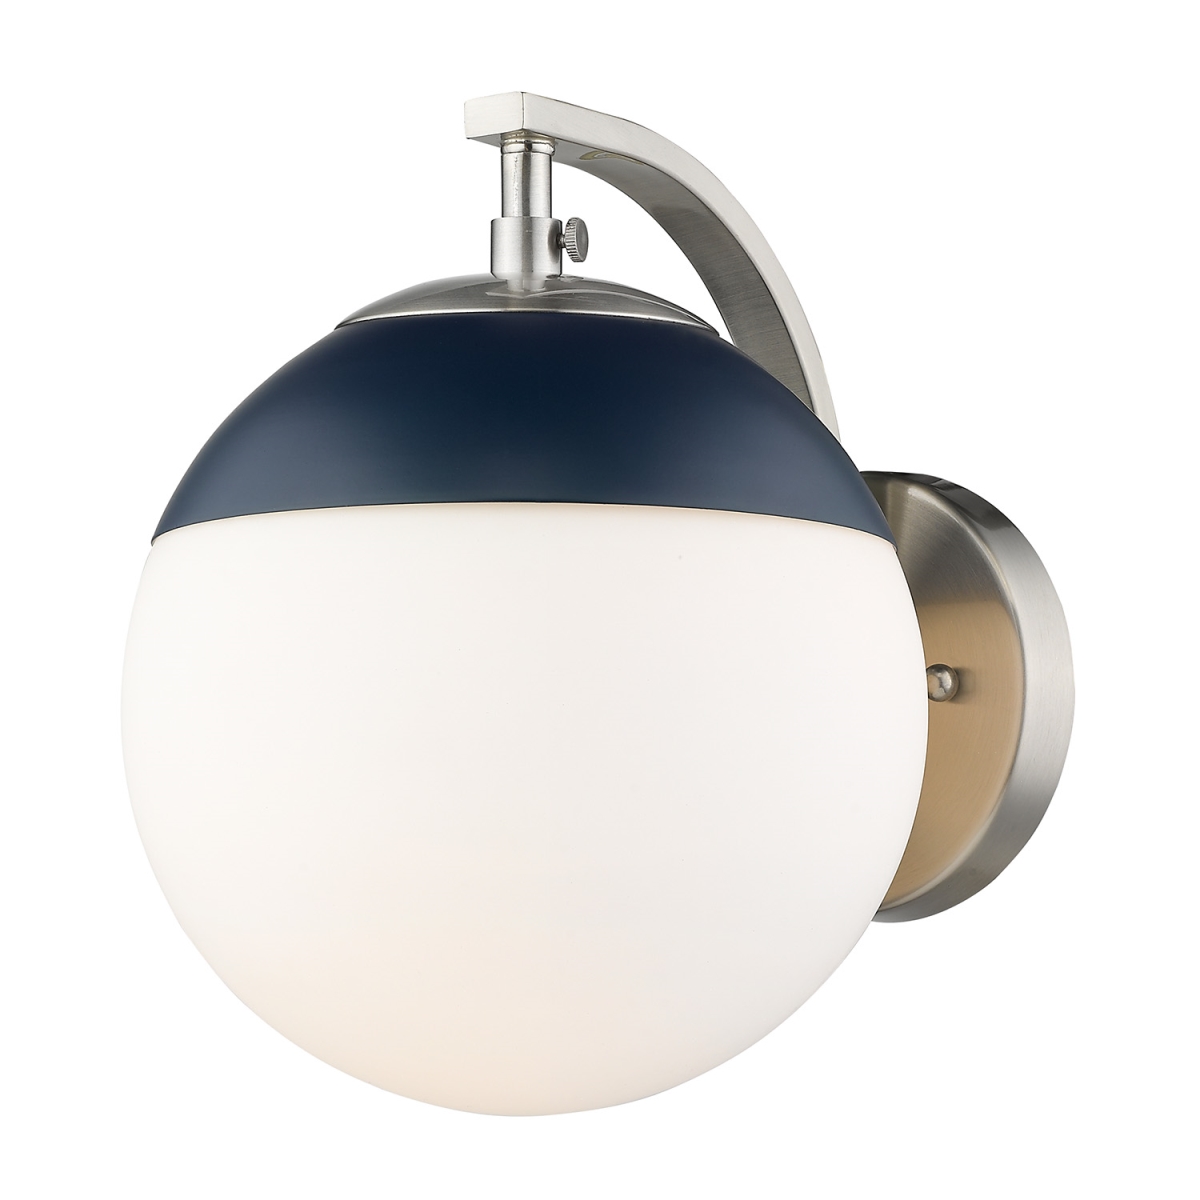 3218-1w Pw-mnvy Dixon Sconce Light With Opal Glass & Navy Cap, Pewter